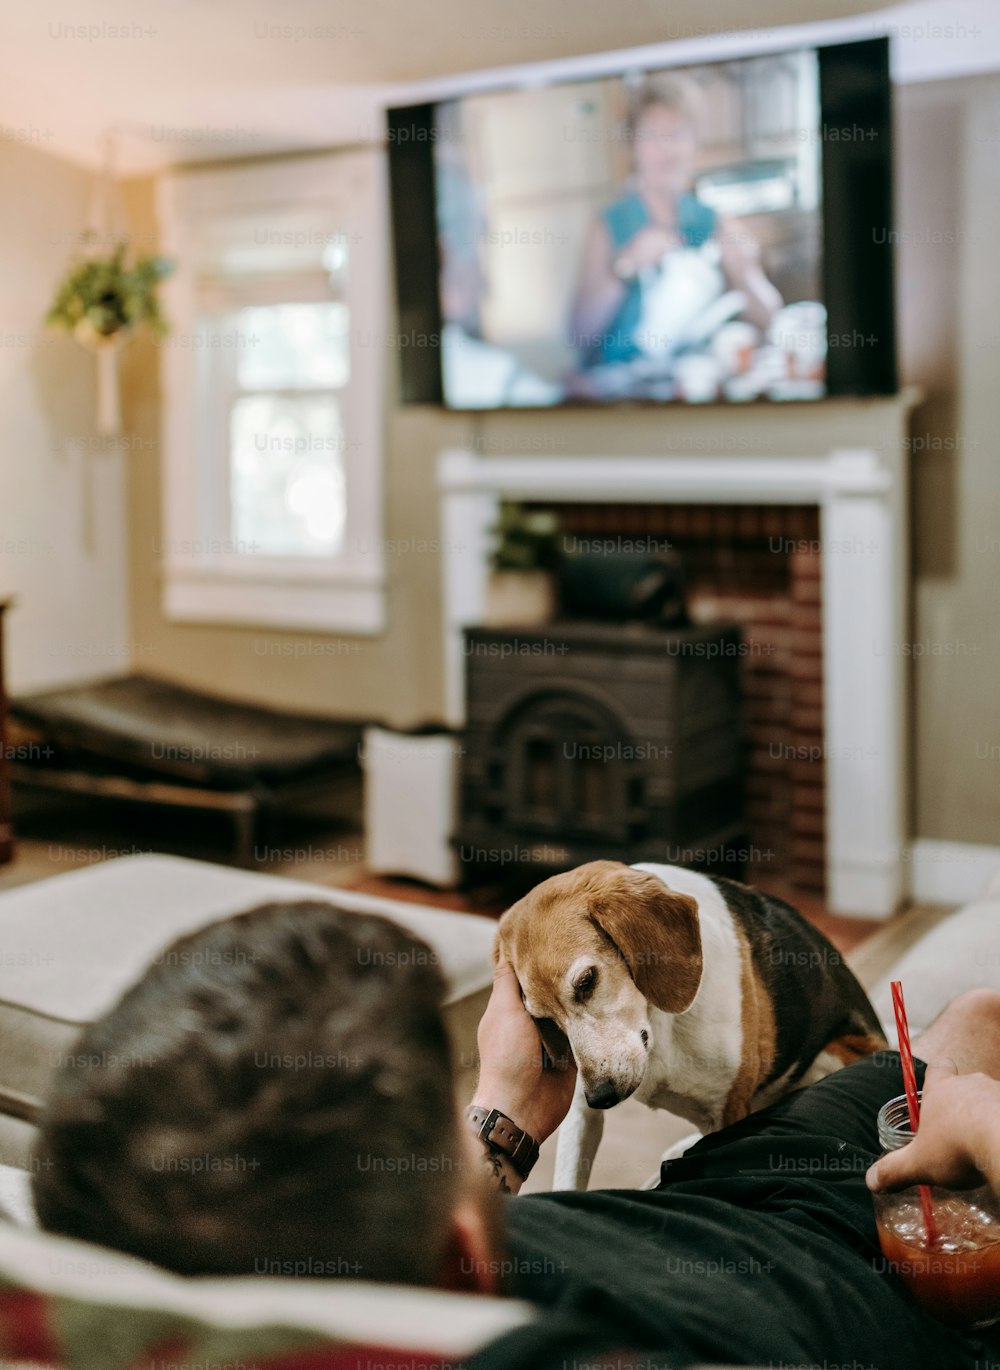 a man sitting on a couch watching tv with a dog on his lap